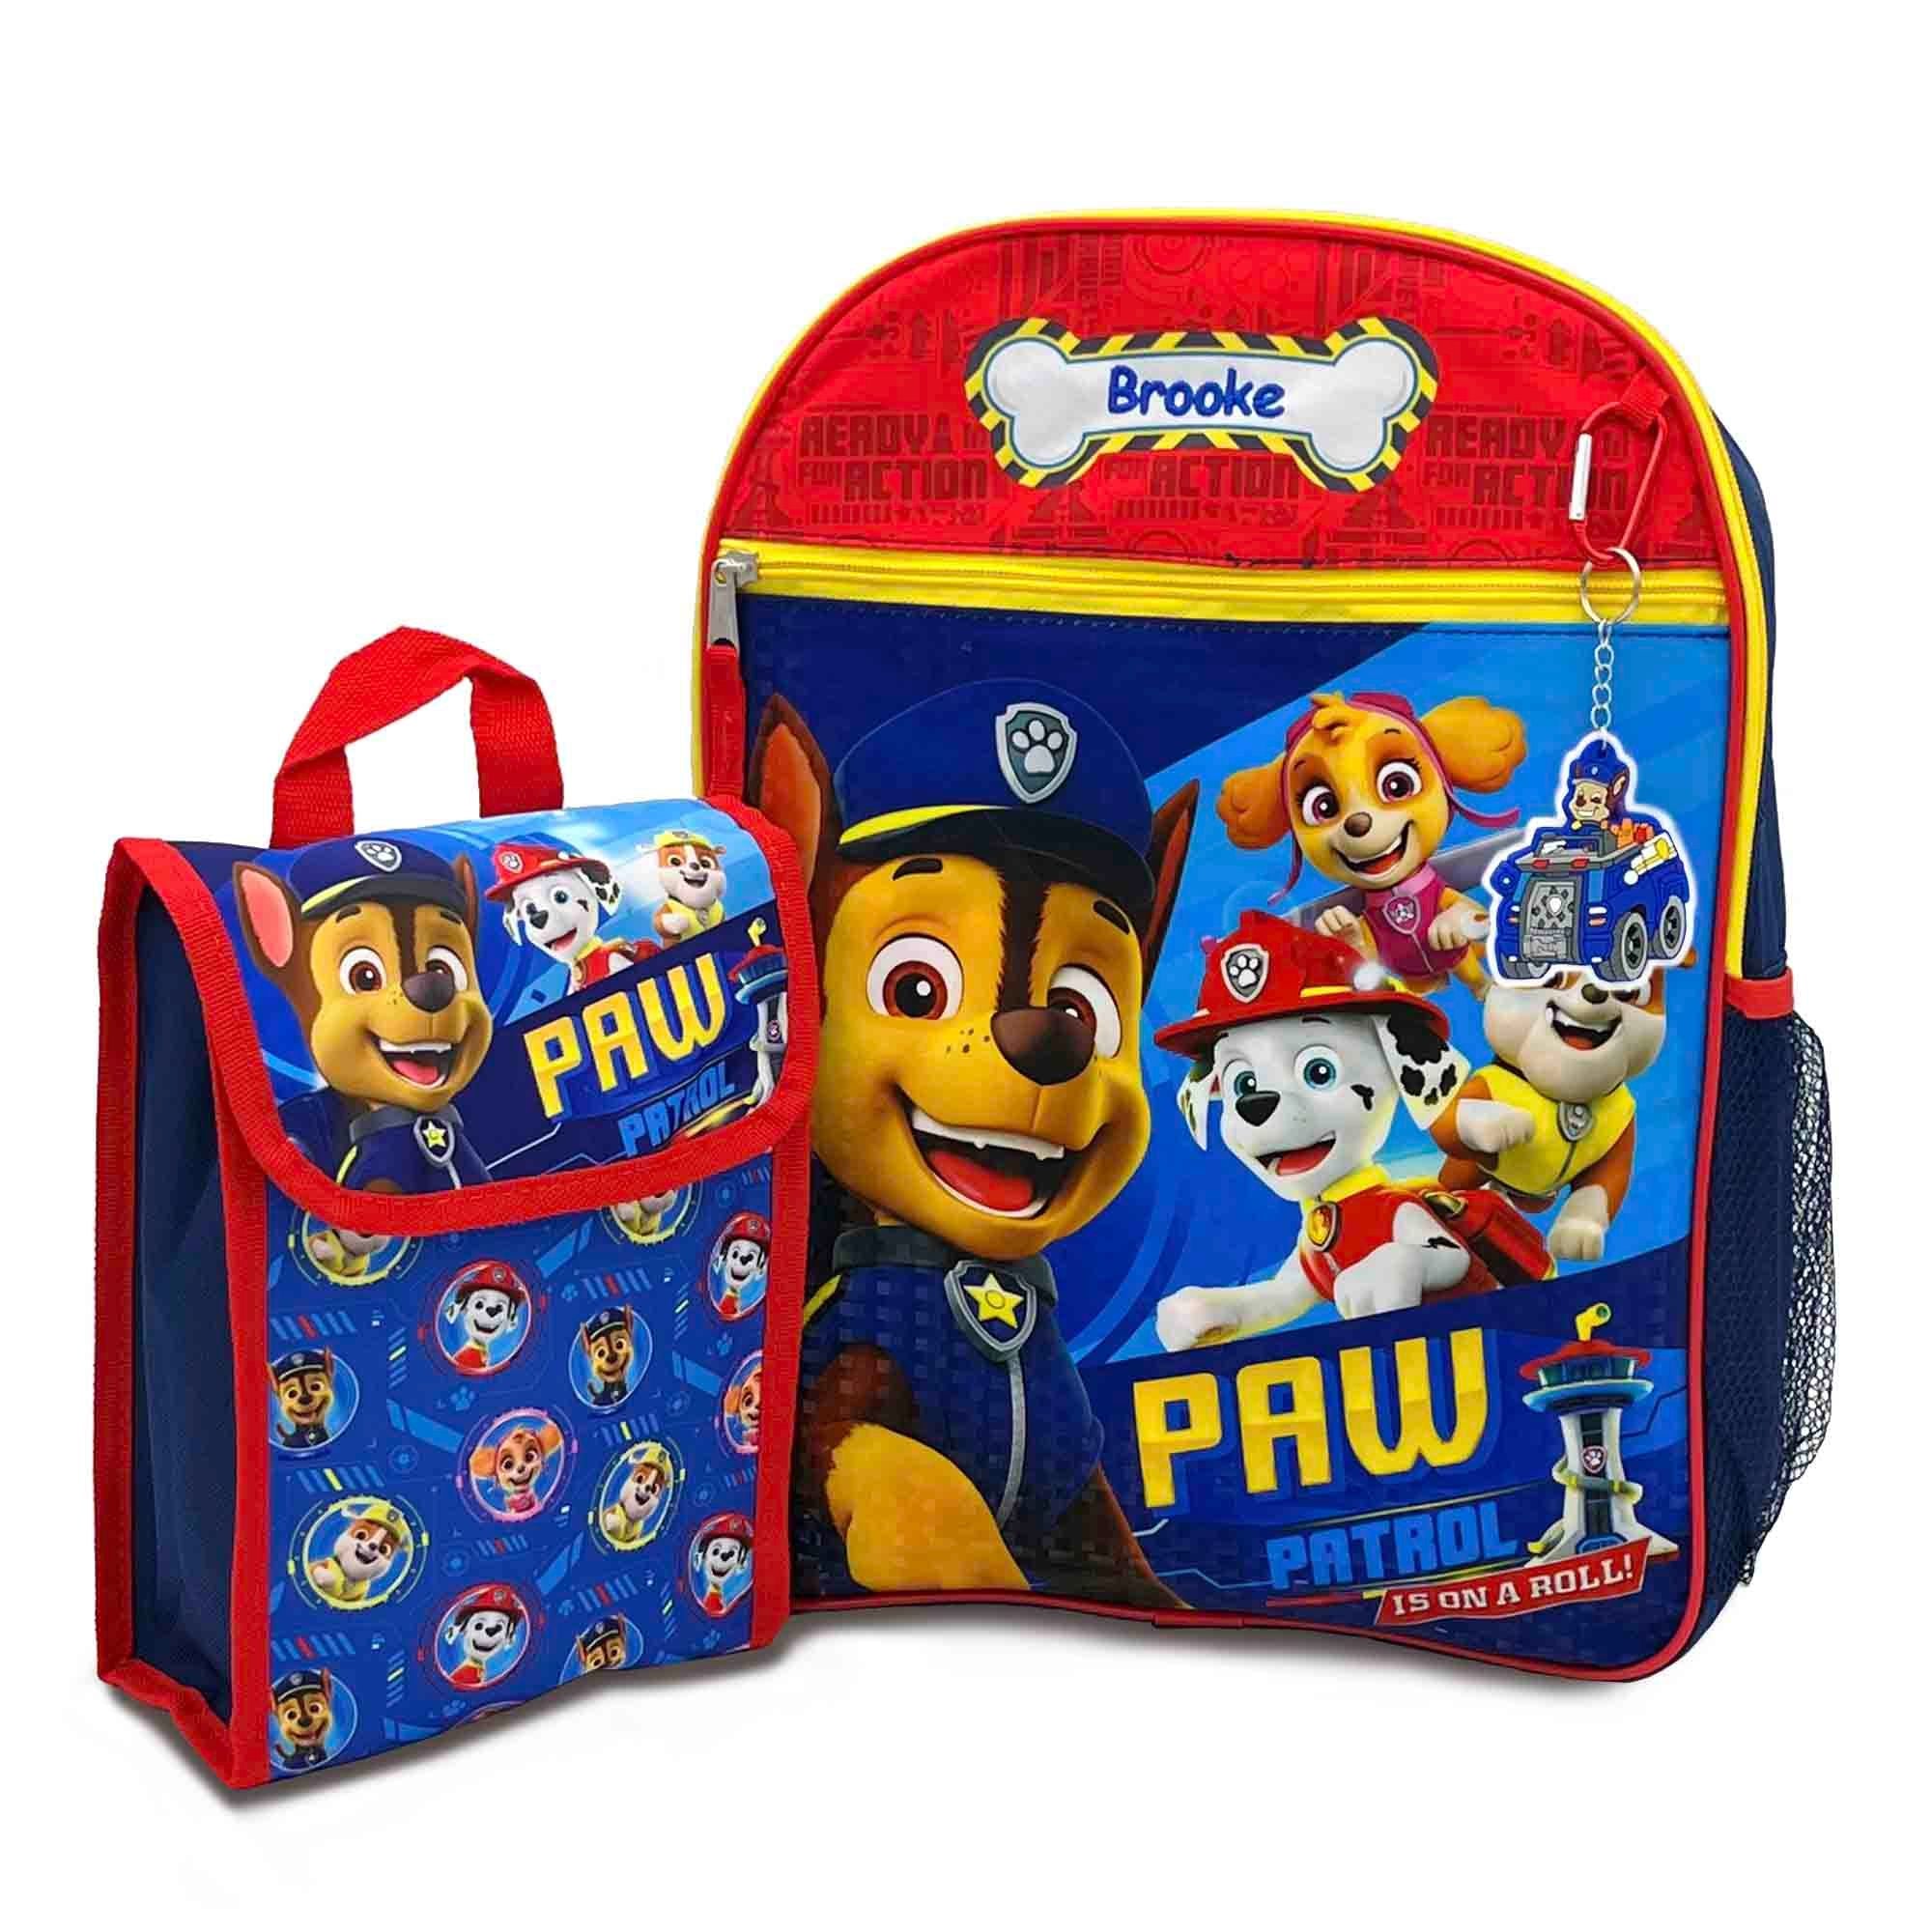 Order a personalised video from PAW Patrol Marshall